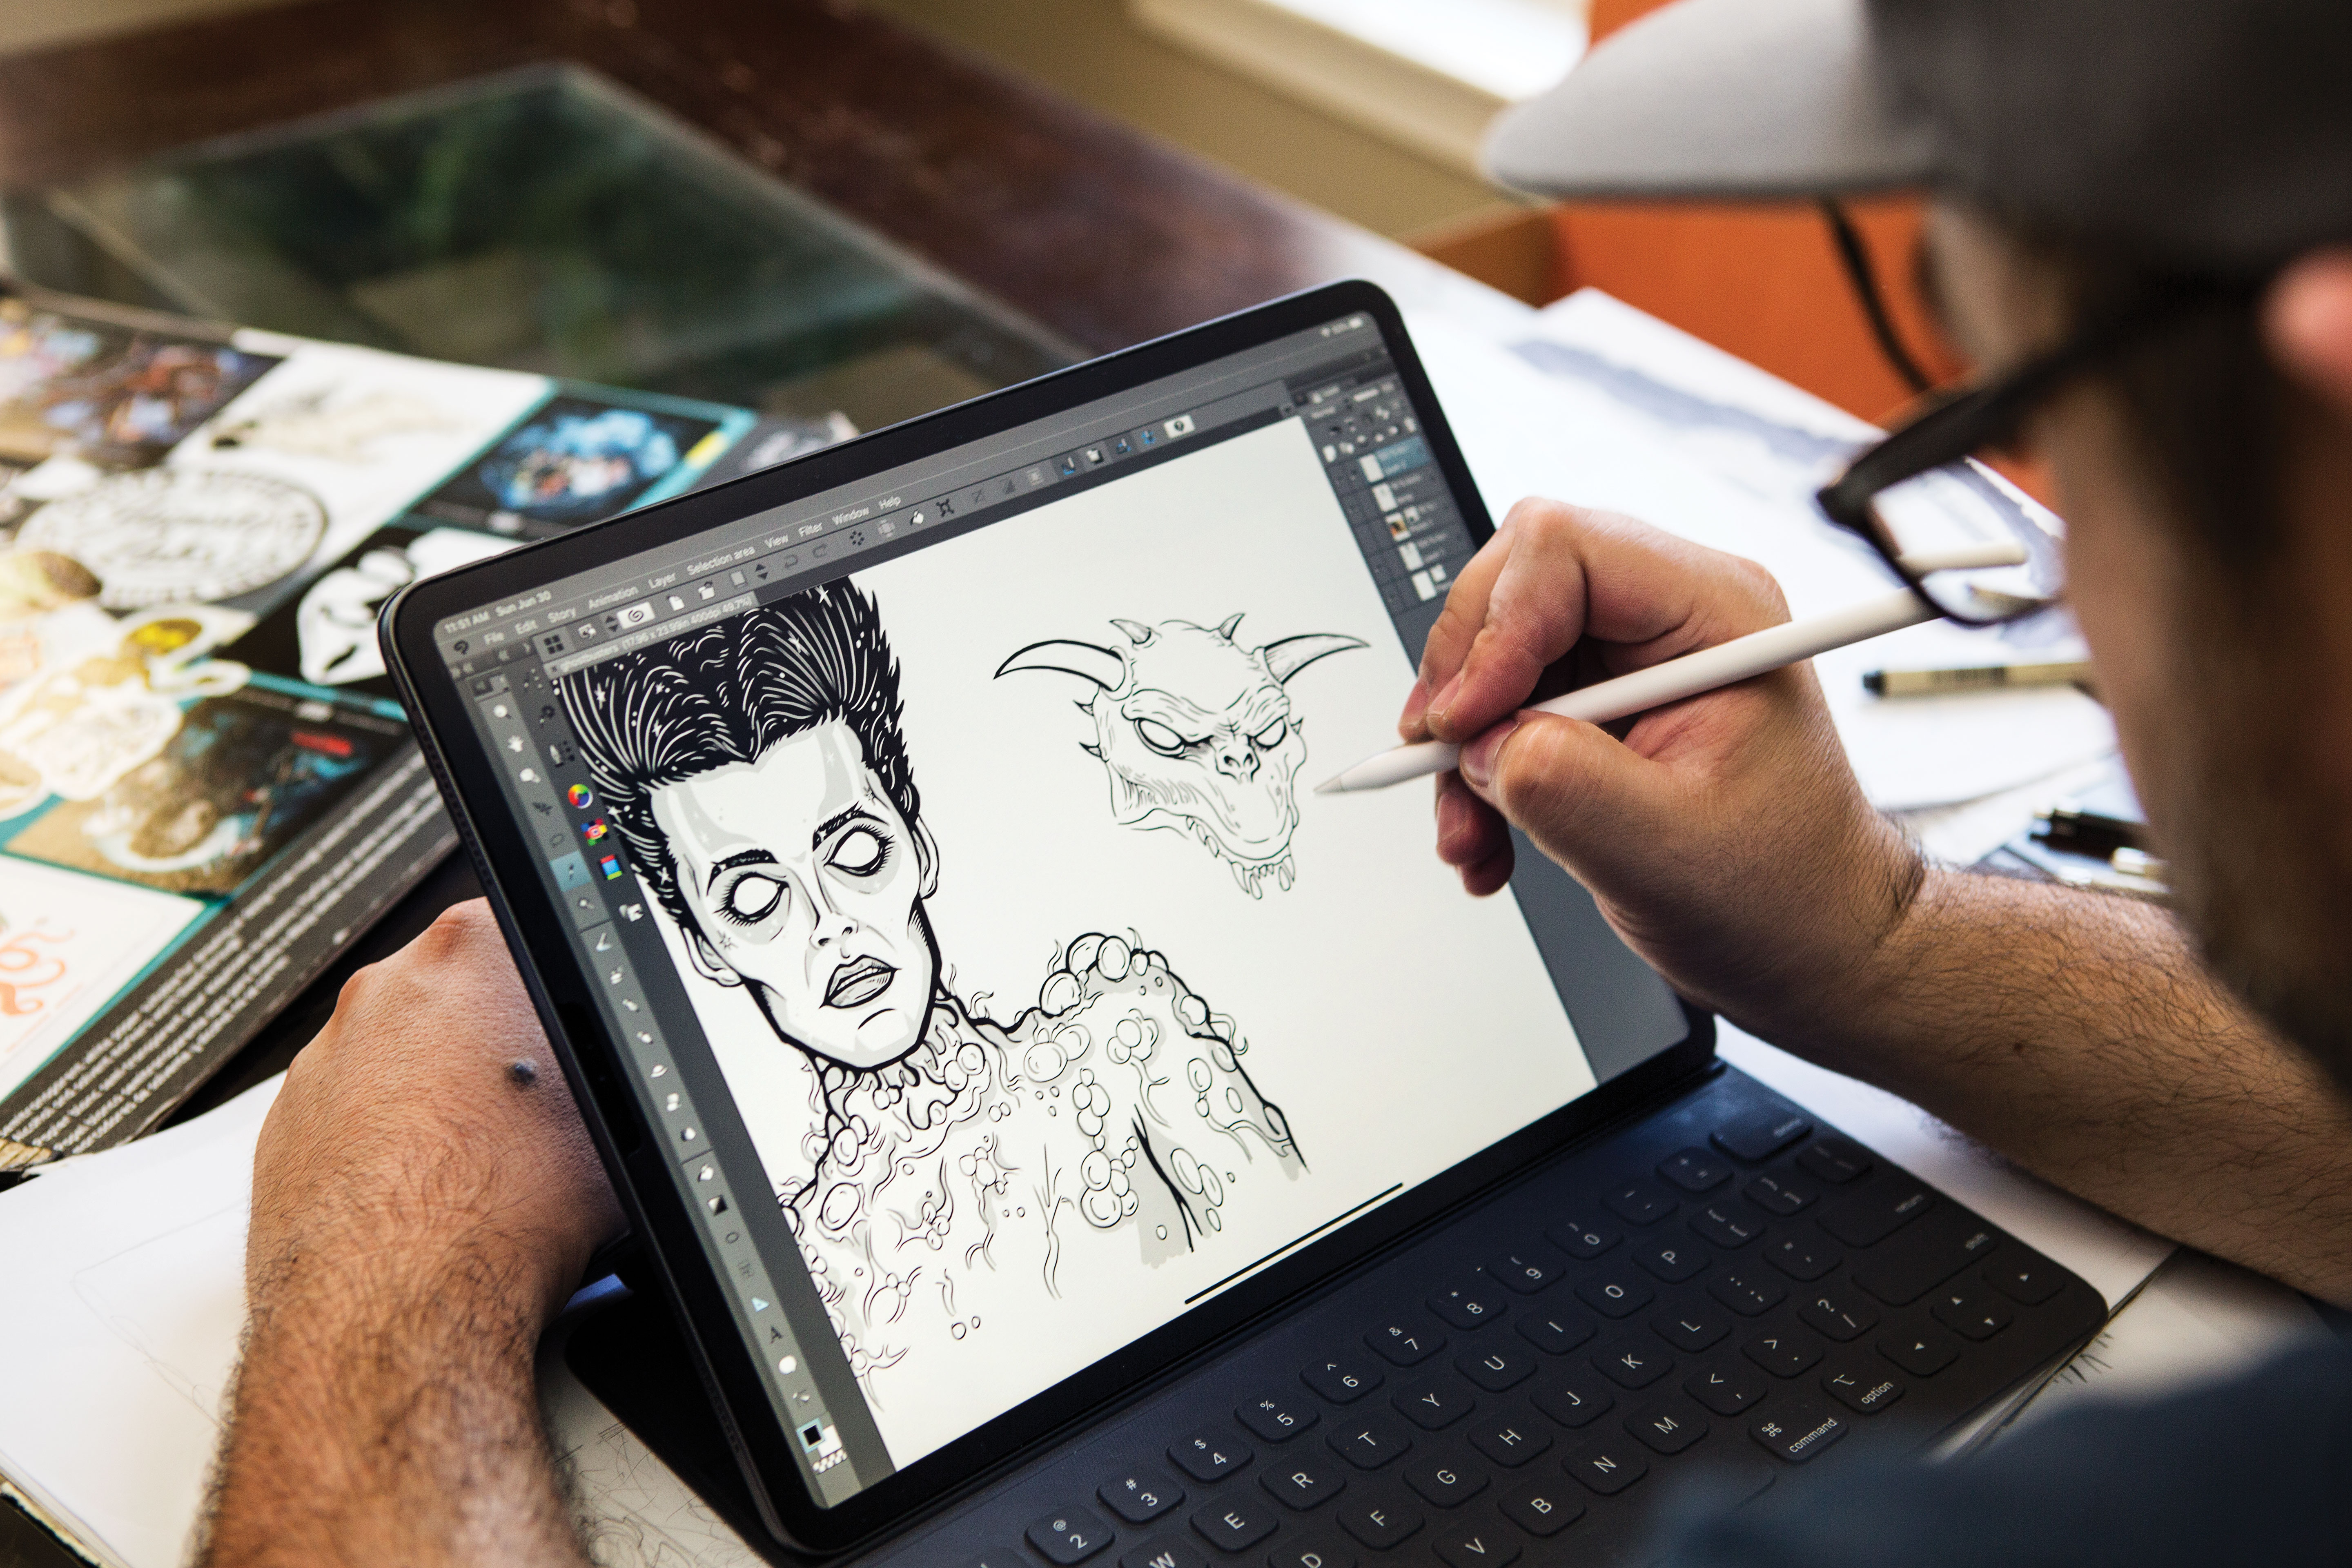 Ghostbusters characters come to life on a digital art pad